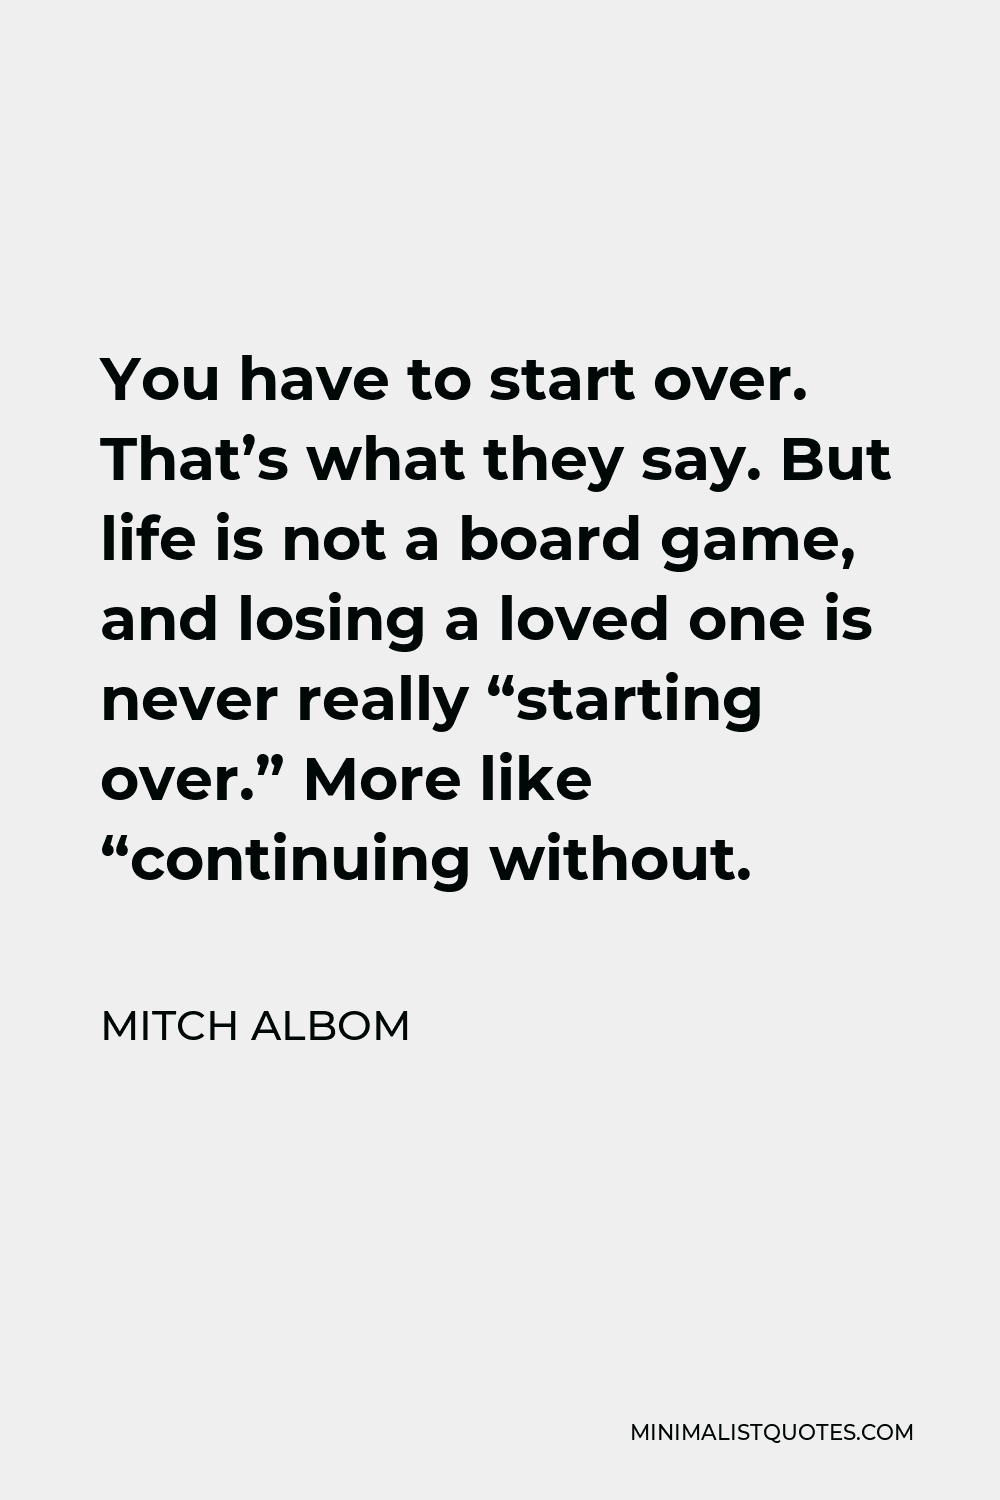 Mitch Albom Quote - You have to start over. That’s what they say. But life is not a board game, and losing a loved one is never really “starting over.” More like “continuing without.